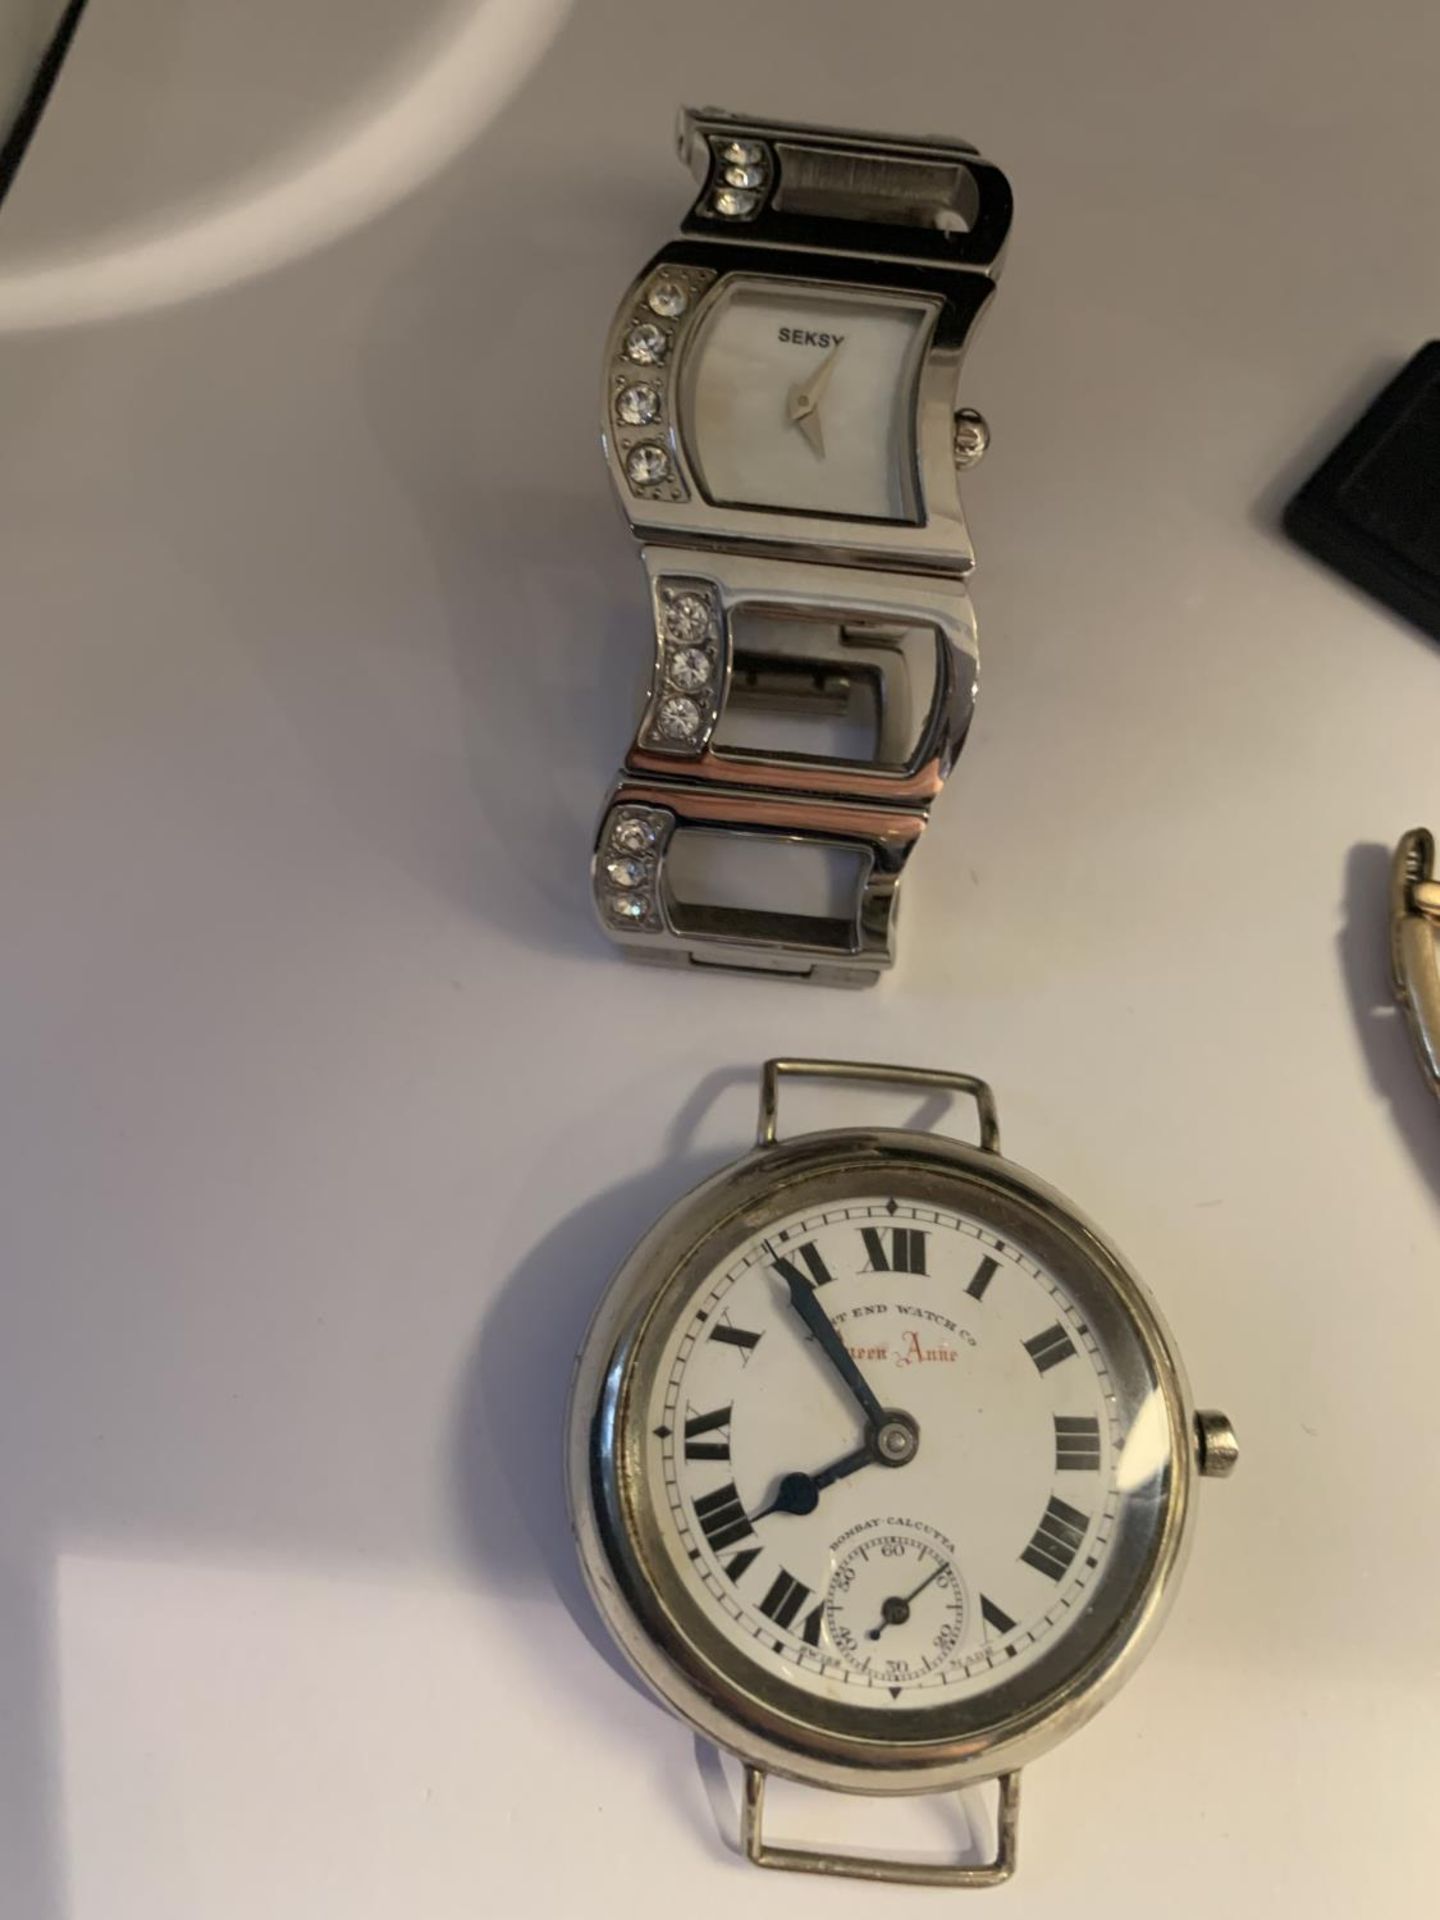 FOUR VARIOUS WATCHES TWO SEEN WORKING BUT NO WARRANTY - Image 2 of 3